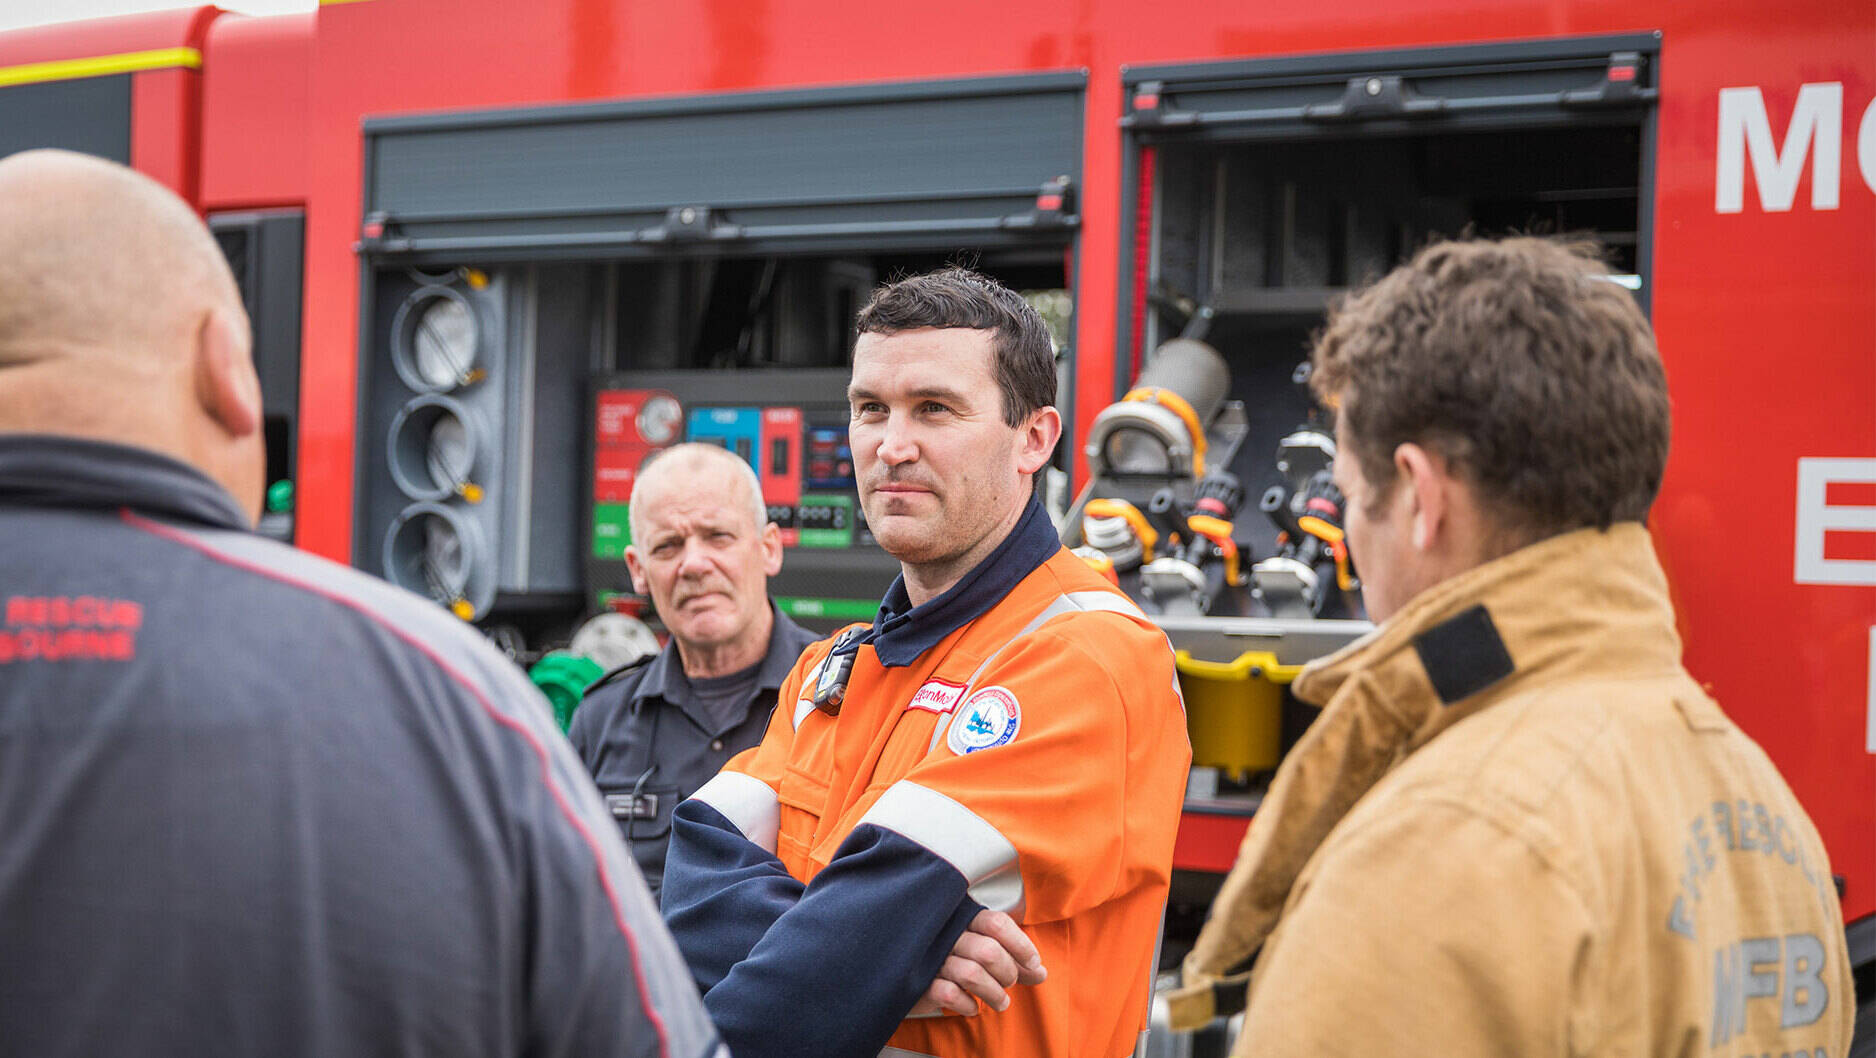 Image Photo— Altona Refinery Emergency Response & Security Lead and Fire Chief Simon Thomas (pictured centre): “We continually work with organisations such as the MFB to ensure we are well-prepared to protect the environment, our neighbours and our workforce, as well as the environment, in the event of an incident at our site.”